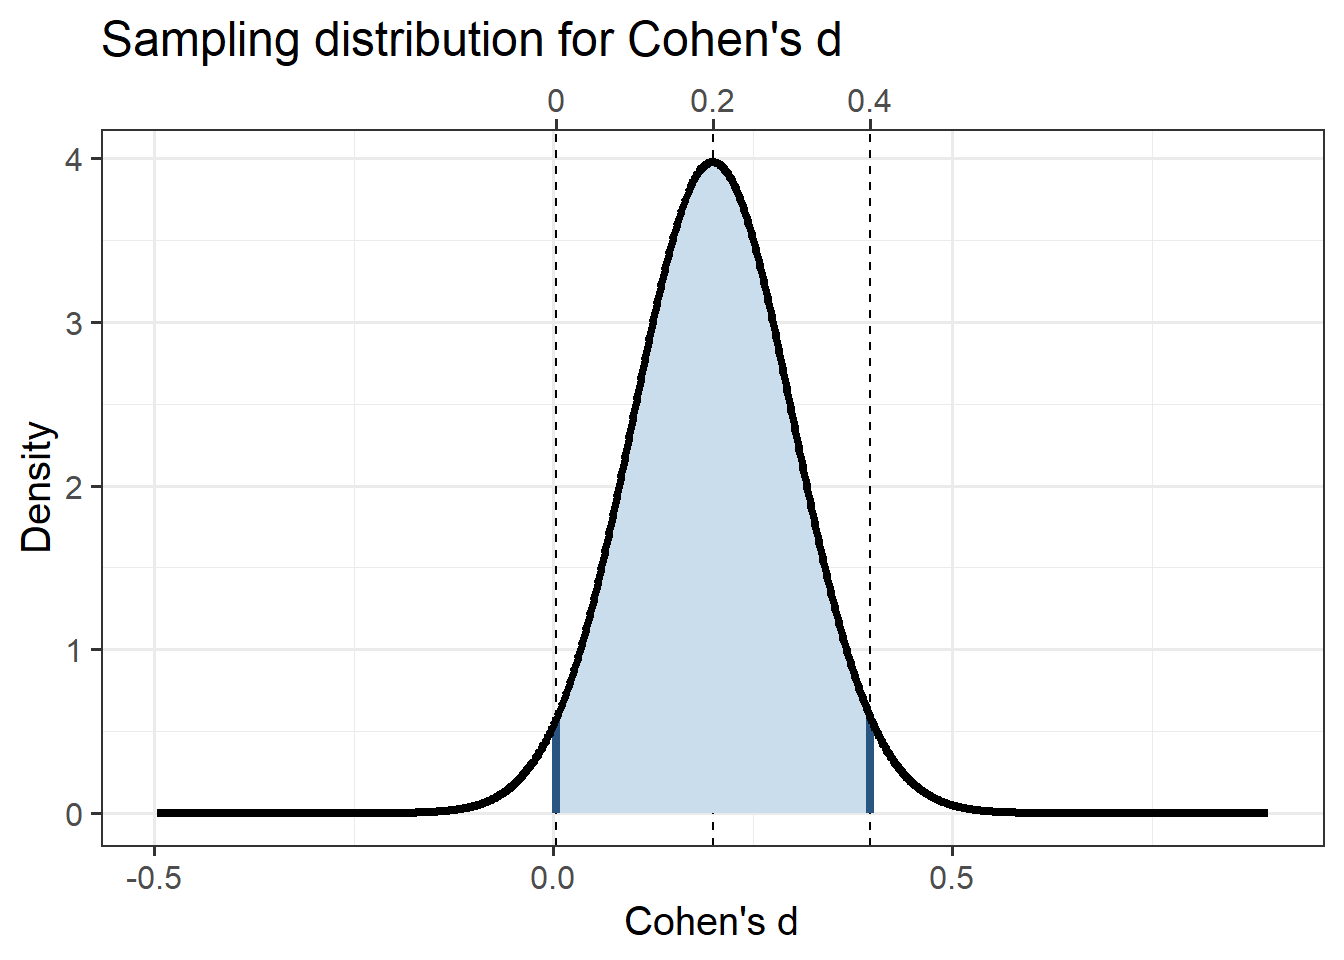 Cohen's d's sampling distribution for a small population effect size (d = 0.2) and for a 2-cell design with 200 participants per group.